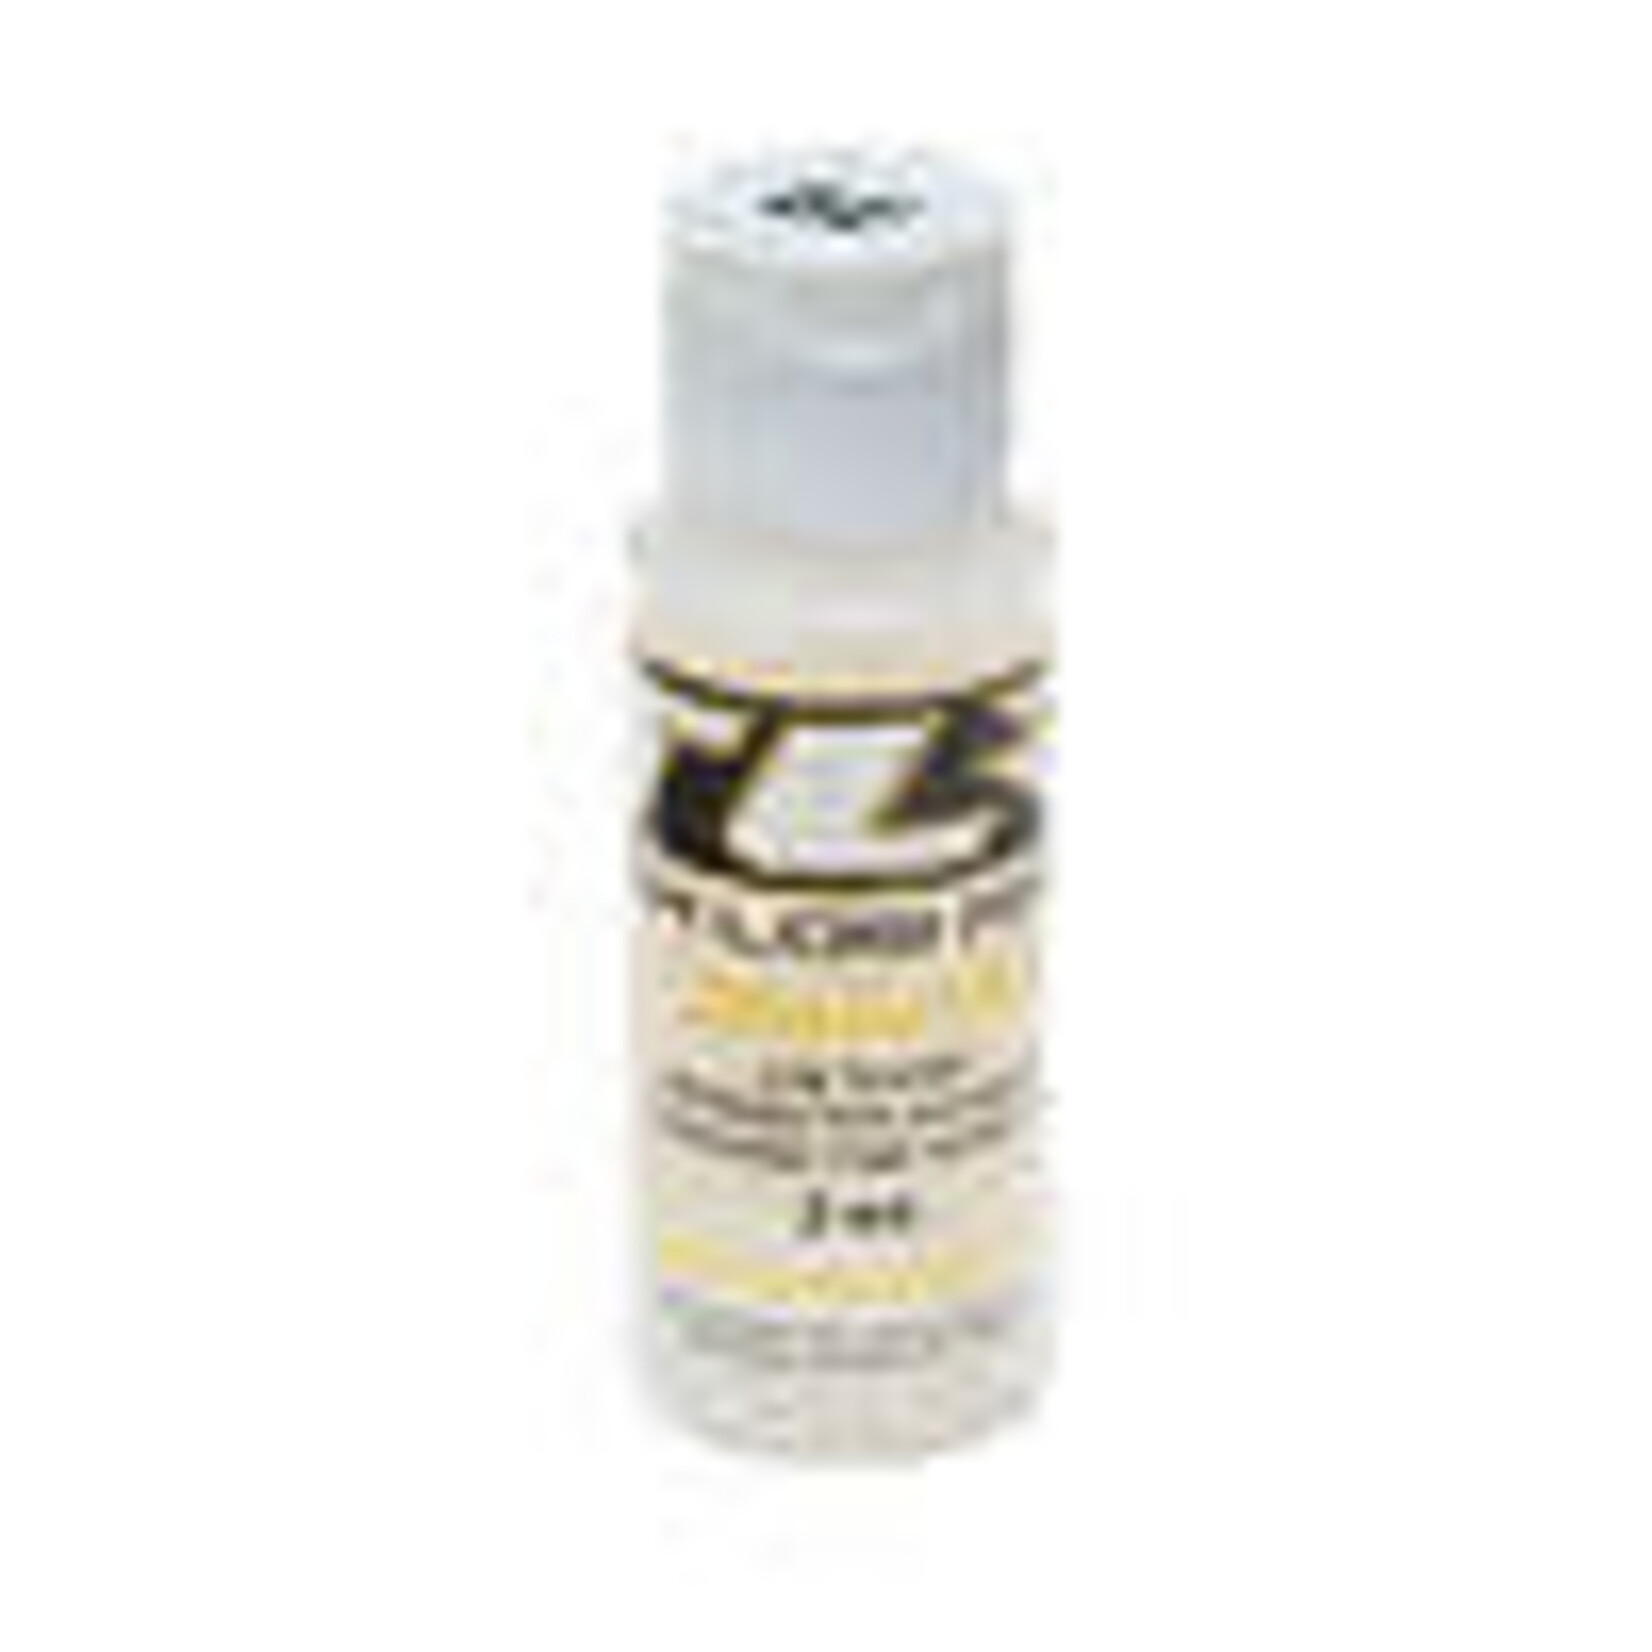 TLR TLR74006   Silicone Shock Oil, 30WT, 338CST, 2oz